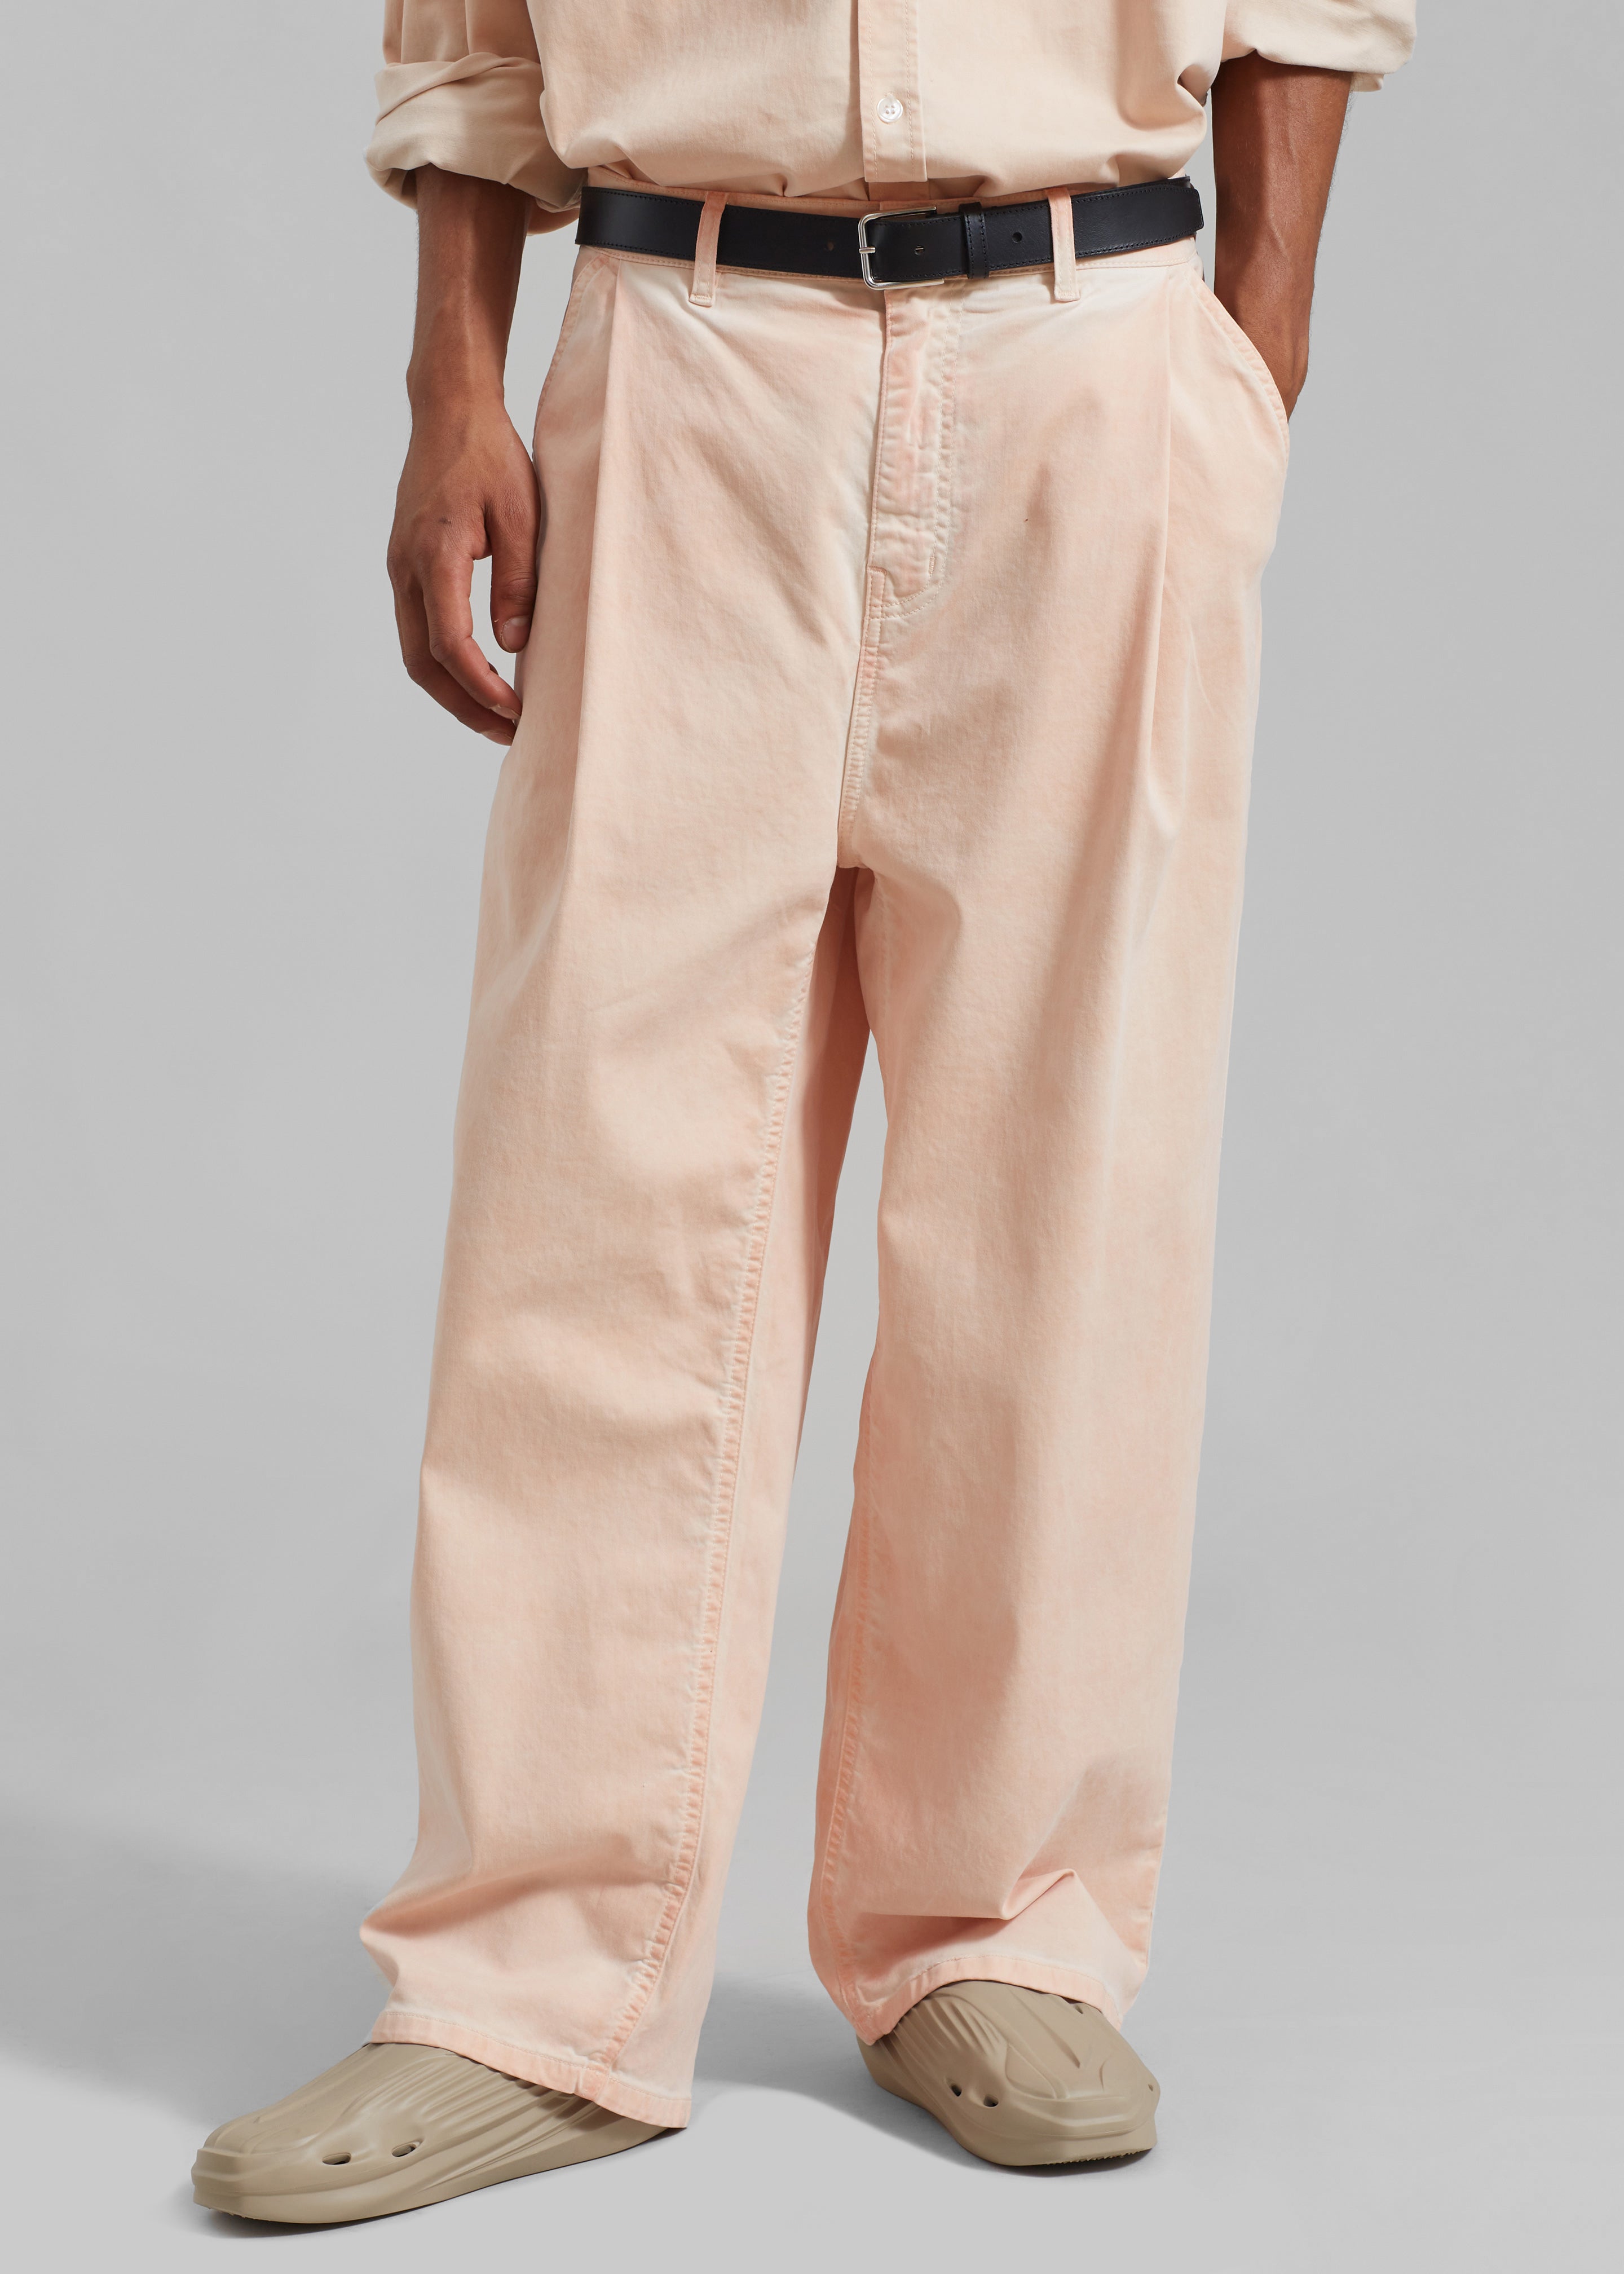 Drew Pants - Faded Pink - 5